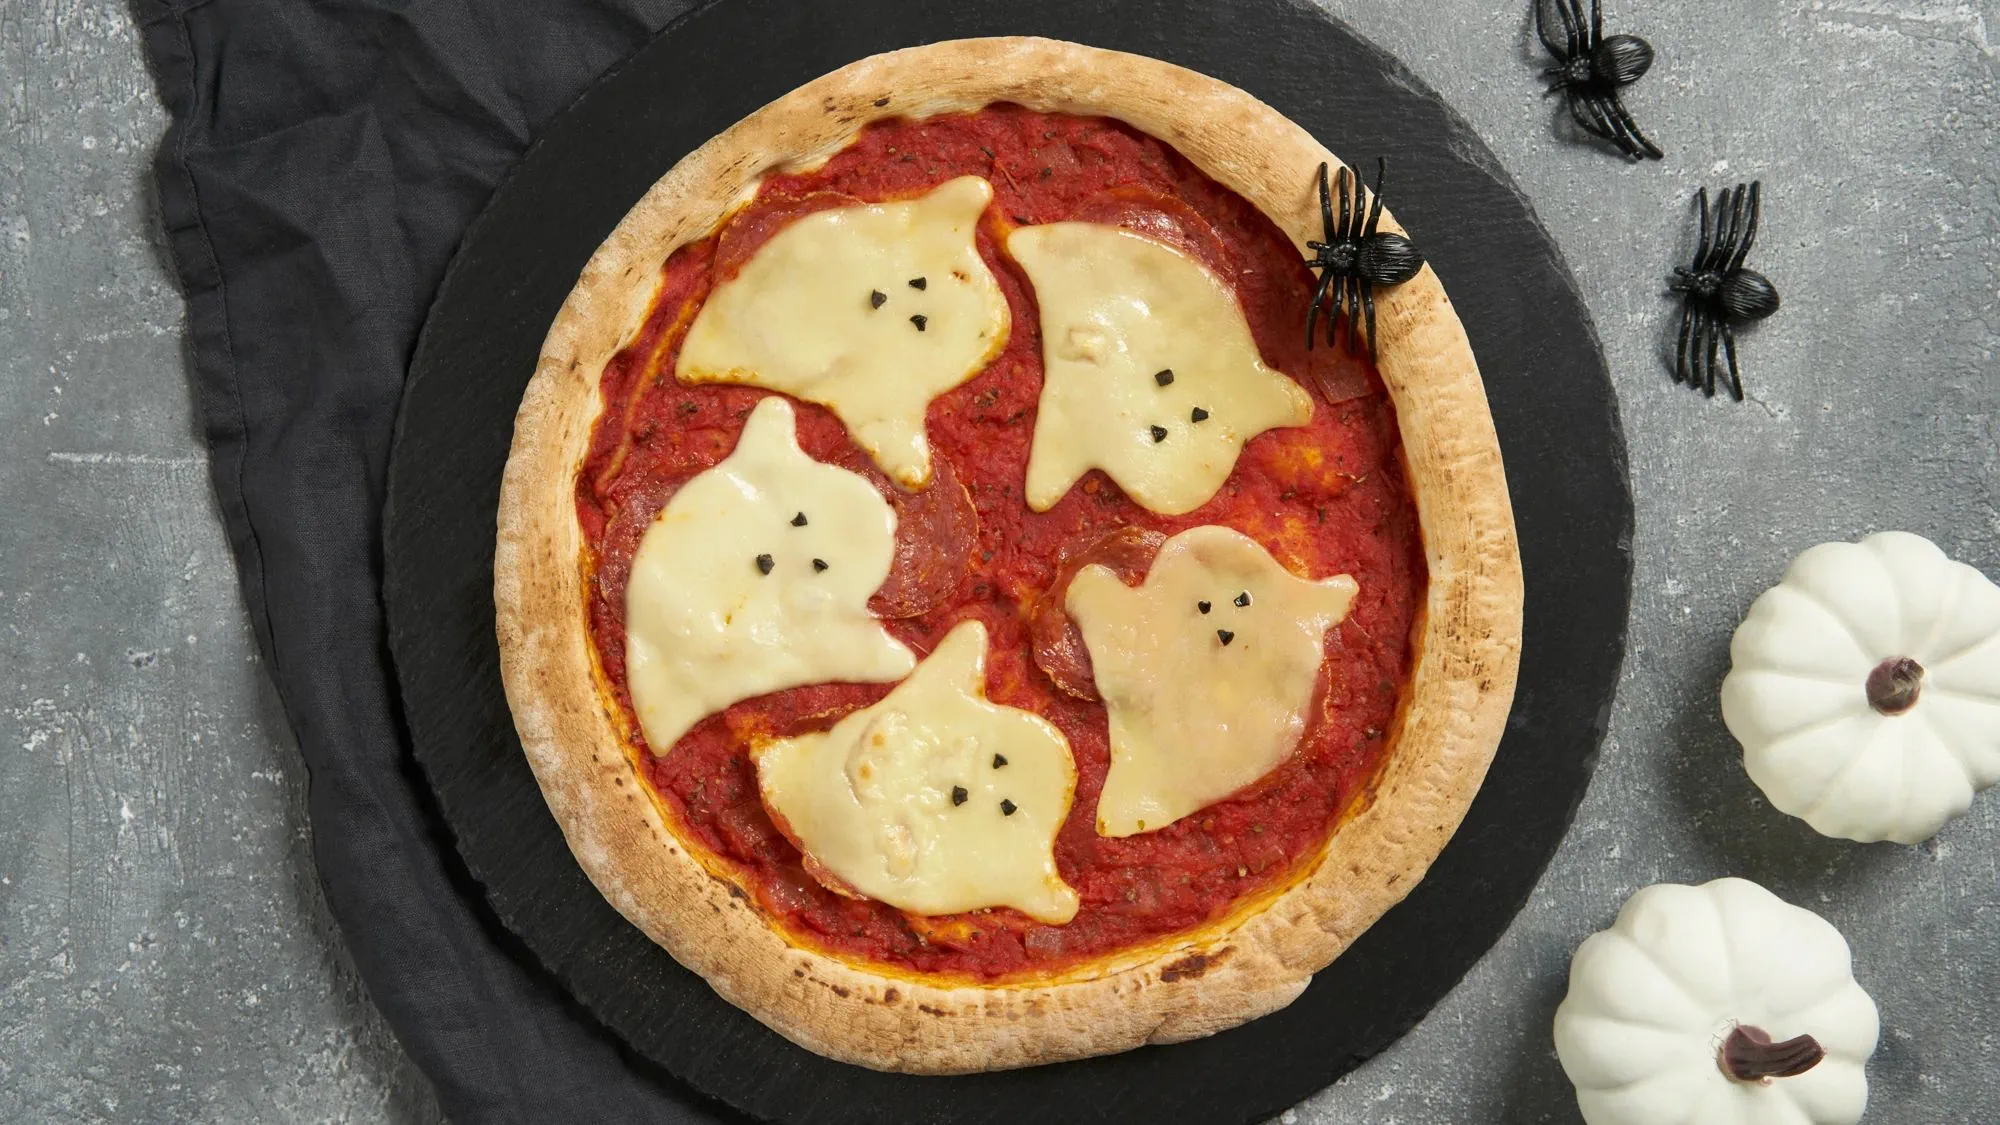 GHOULISH PIZZA